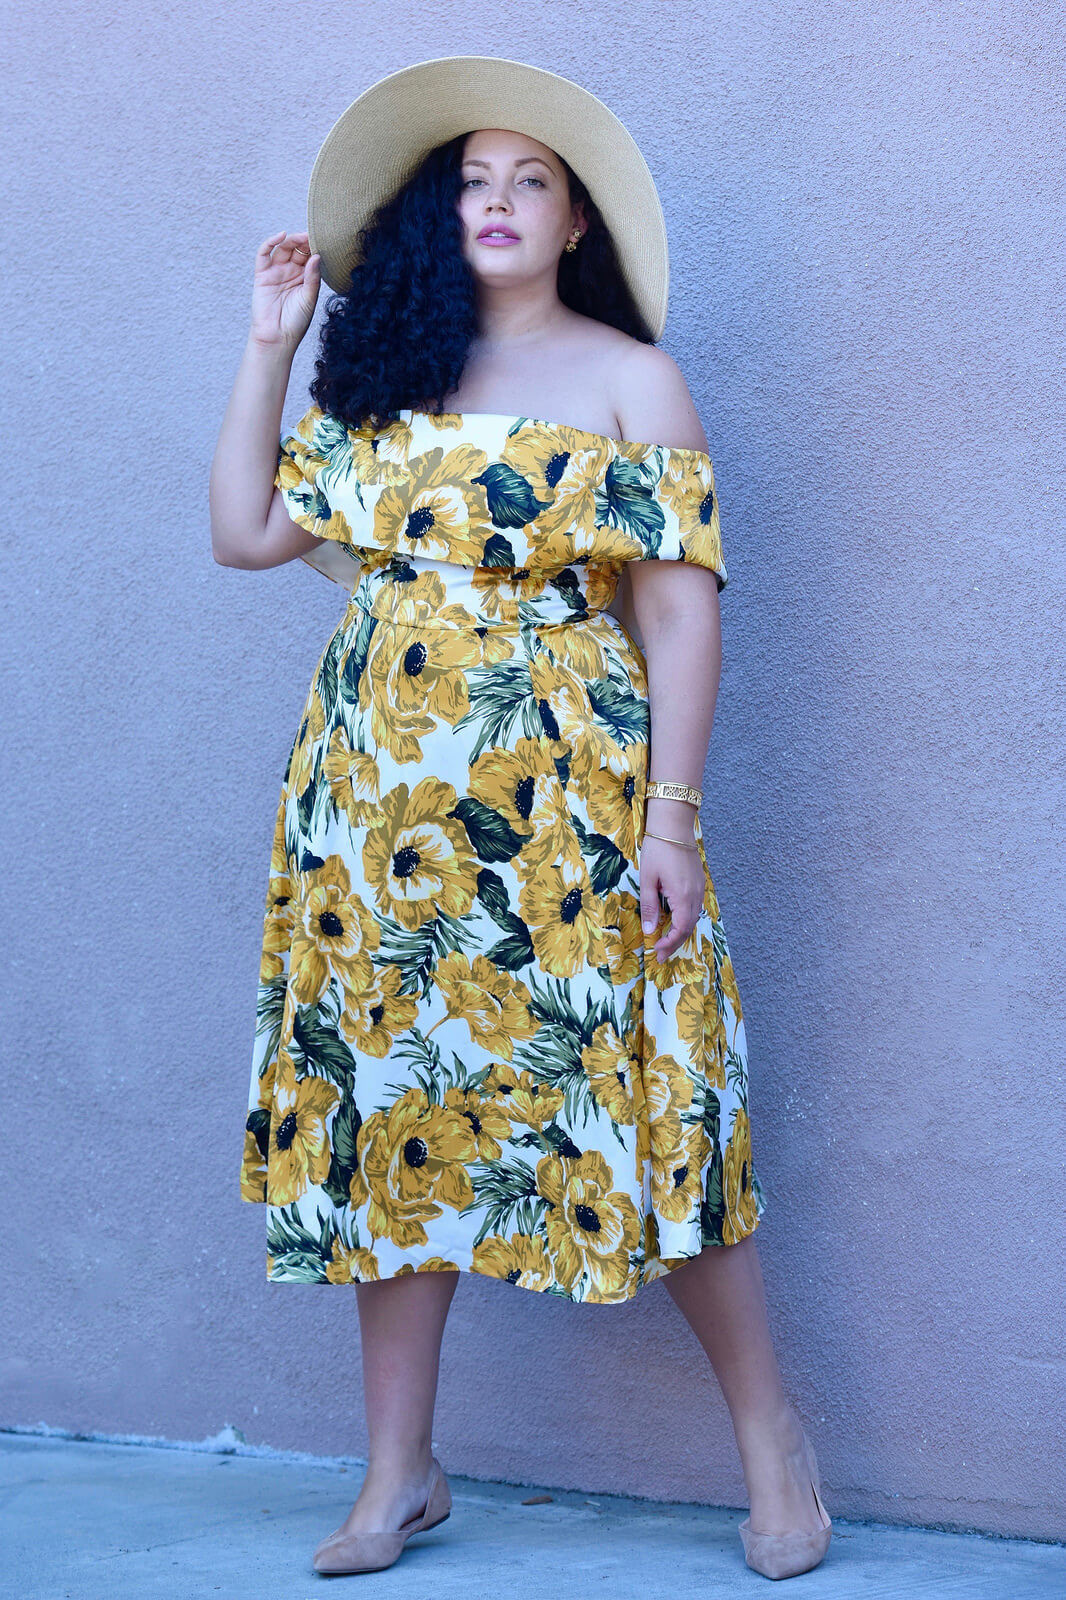 No strapless bra required with this dress via @GirlWithCurves